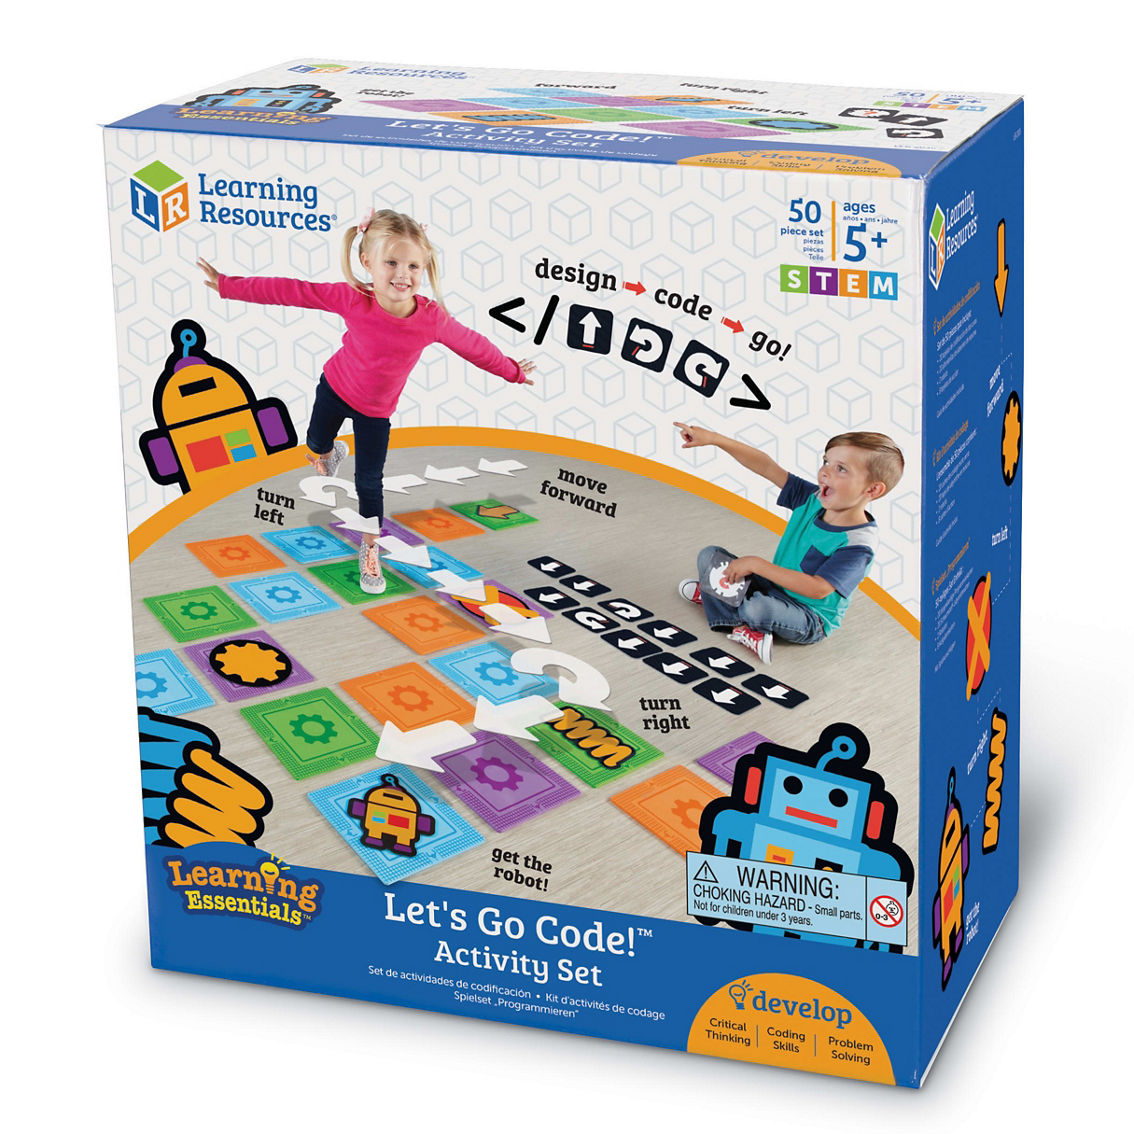 Learning Resources Learning Essentials - Let's Go Code! Activity Set - Image 3 of 5